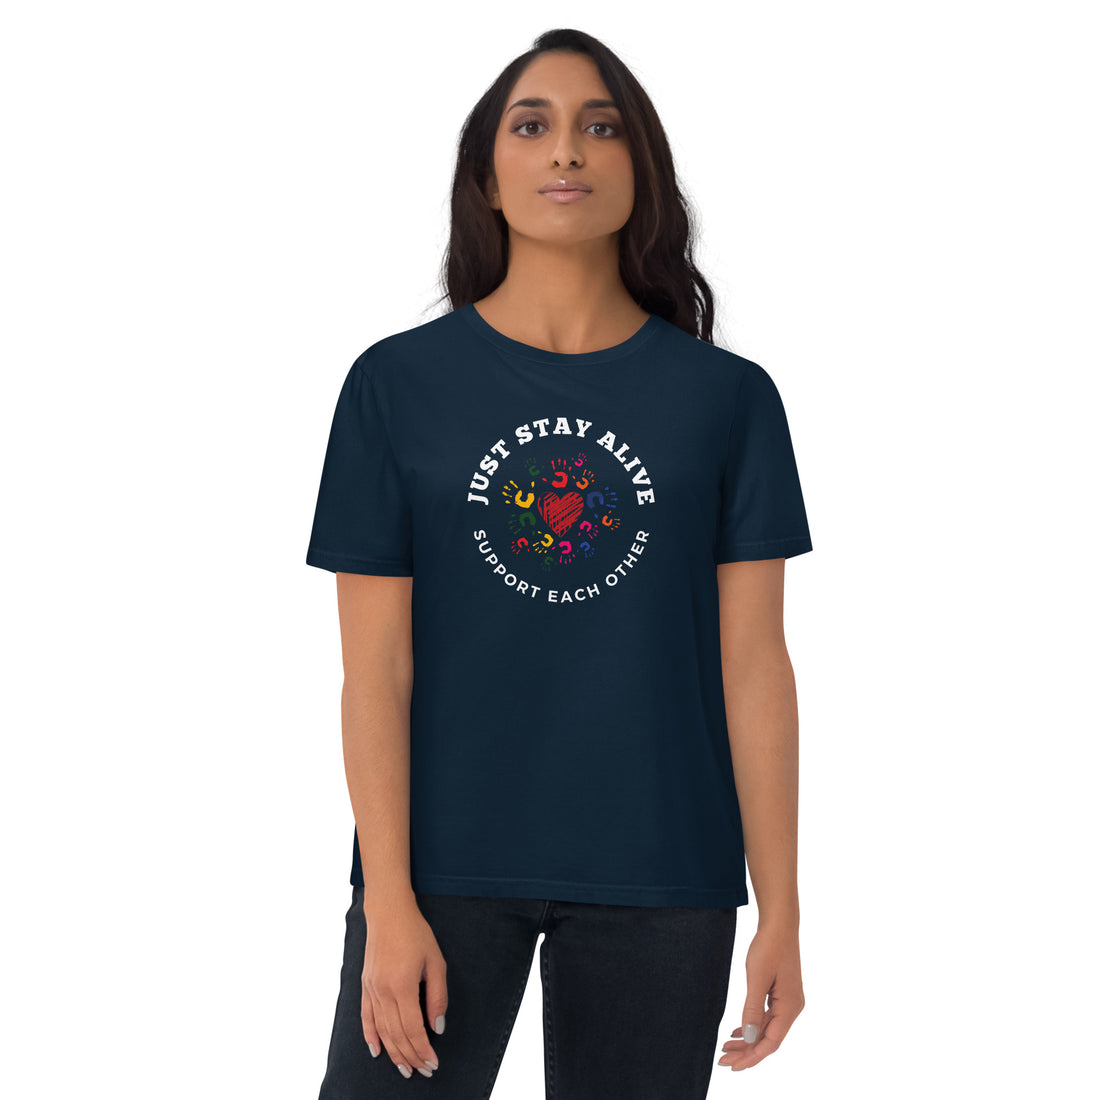 Human Right Support T-shirt